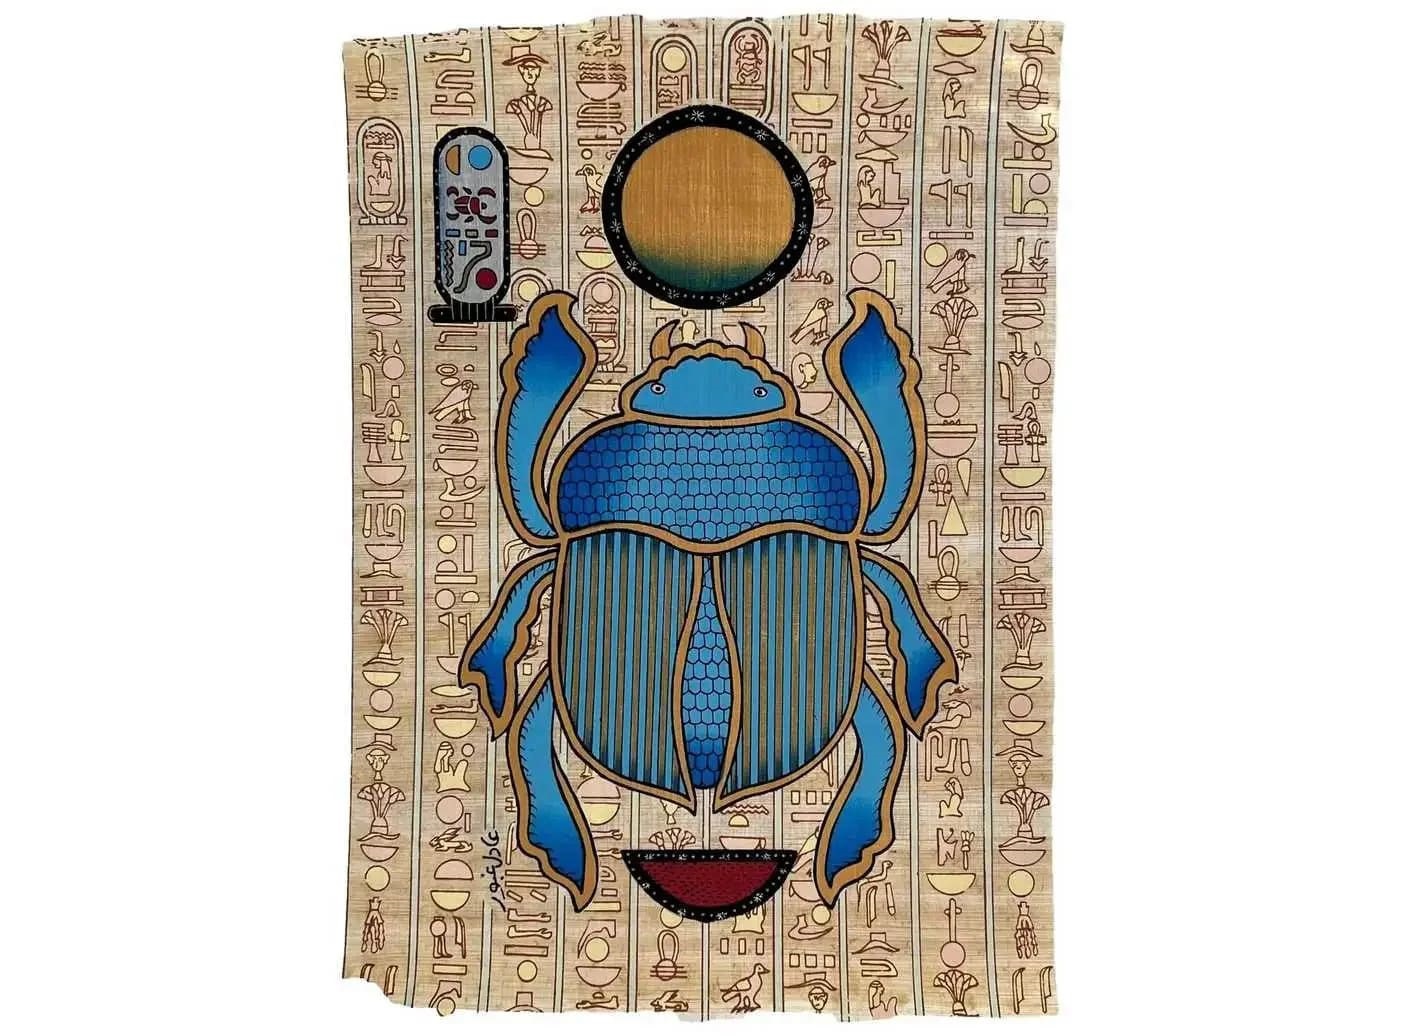 scarab-good-luck-egyptian-scarab-beetle-kherpi-god-of-the-rising-sun-egypt-papyrus-painting - History Glimpse